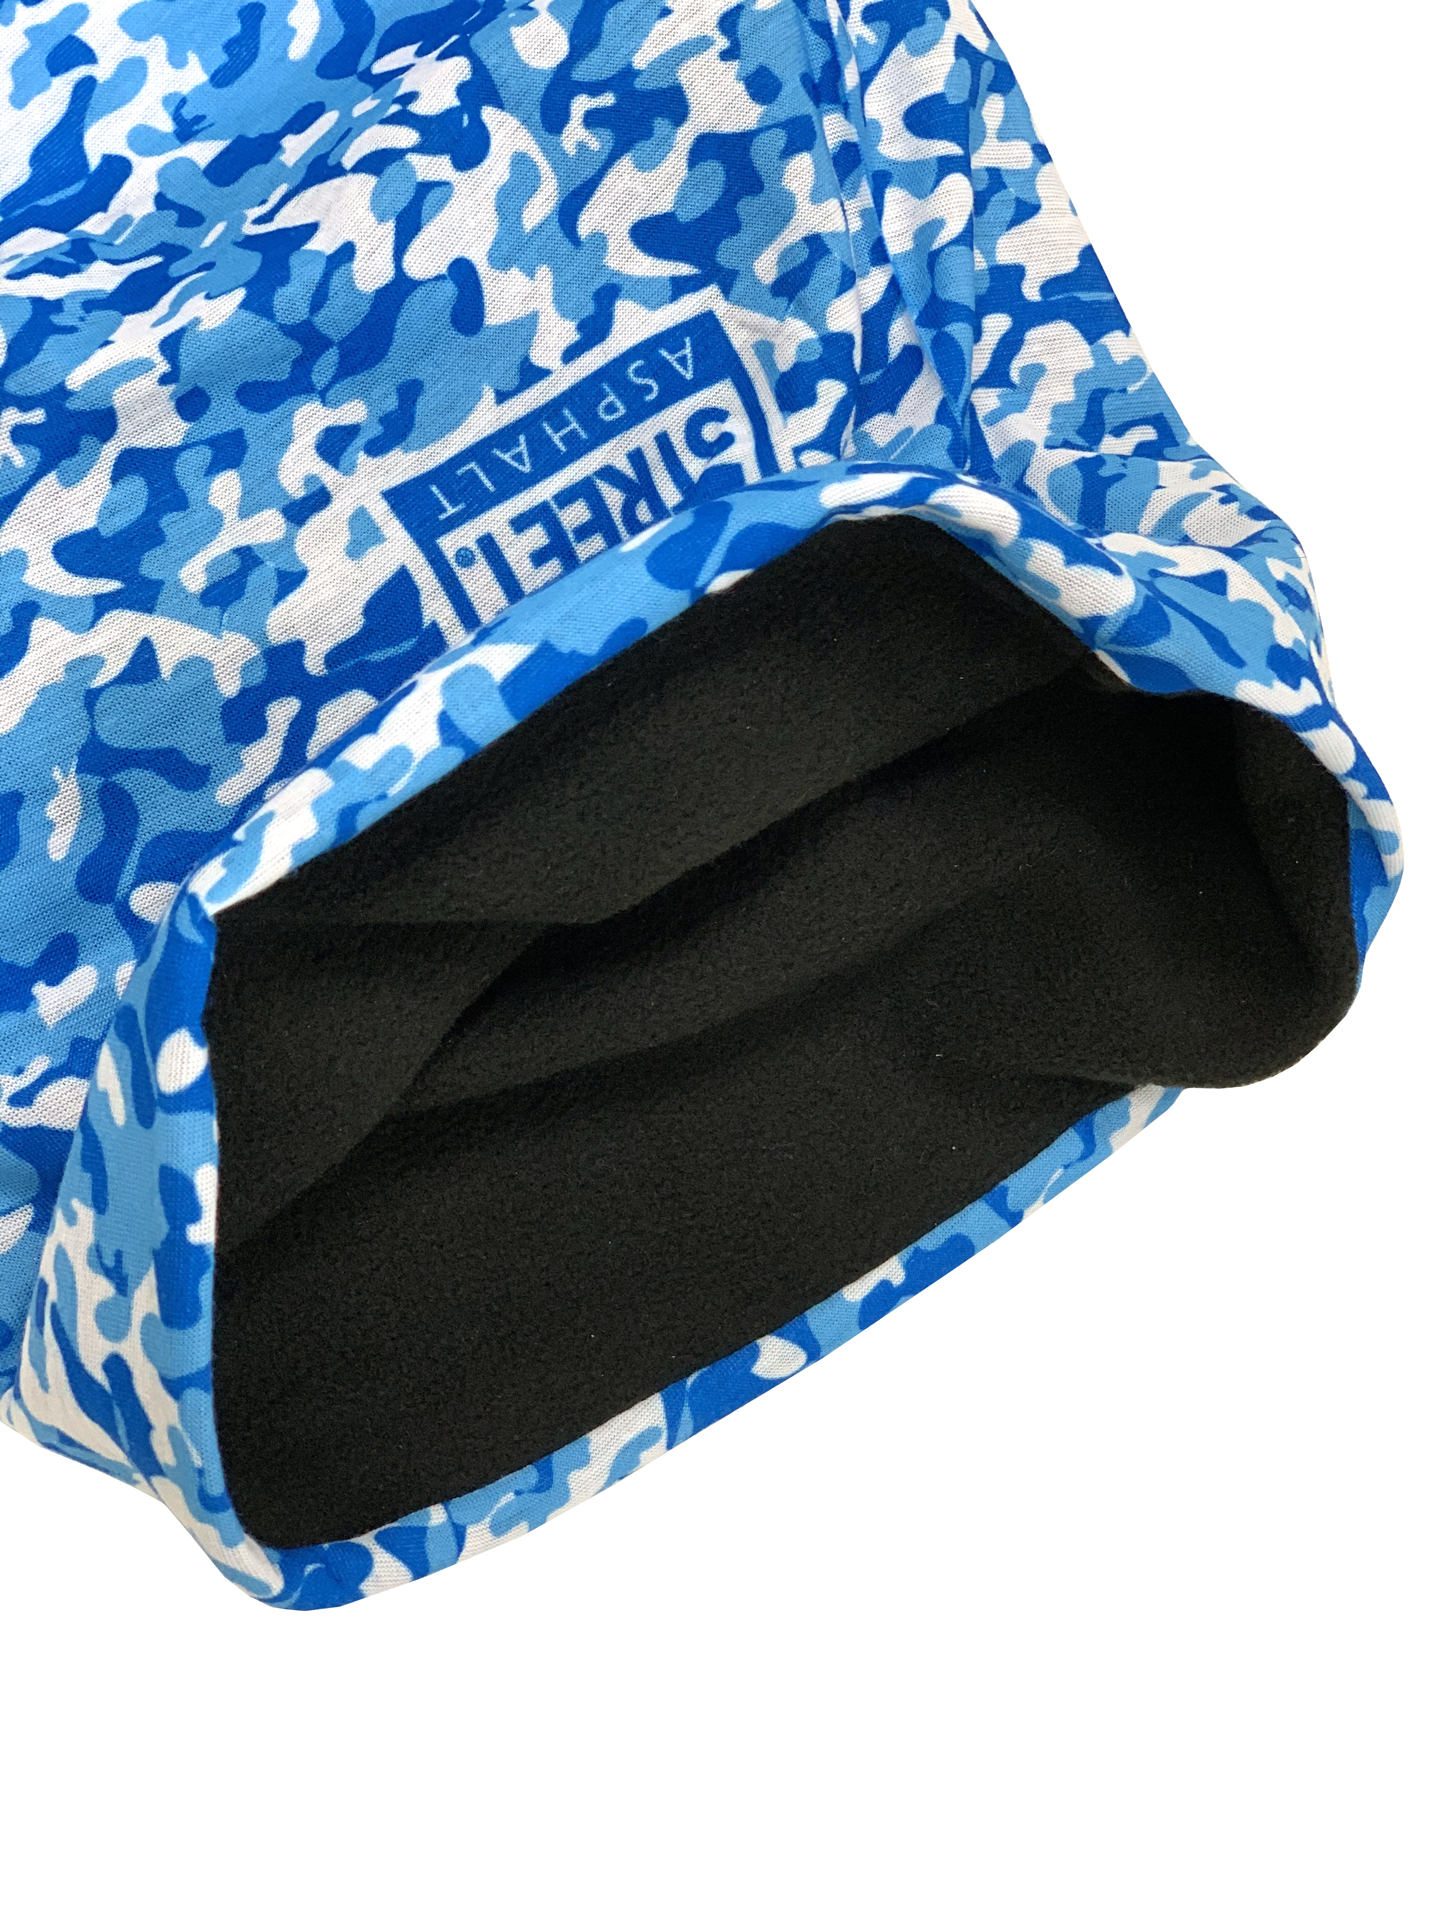 blue snood with a black fleece lining